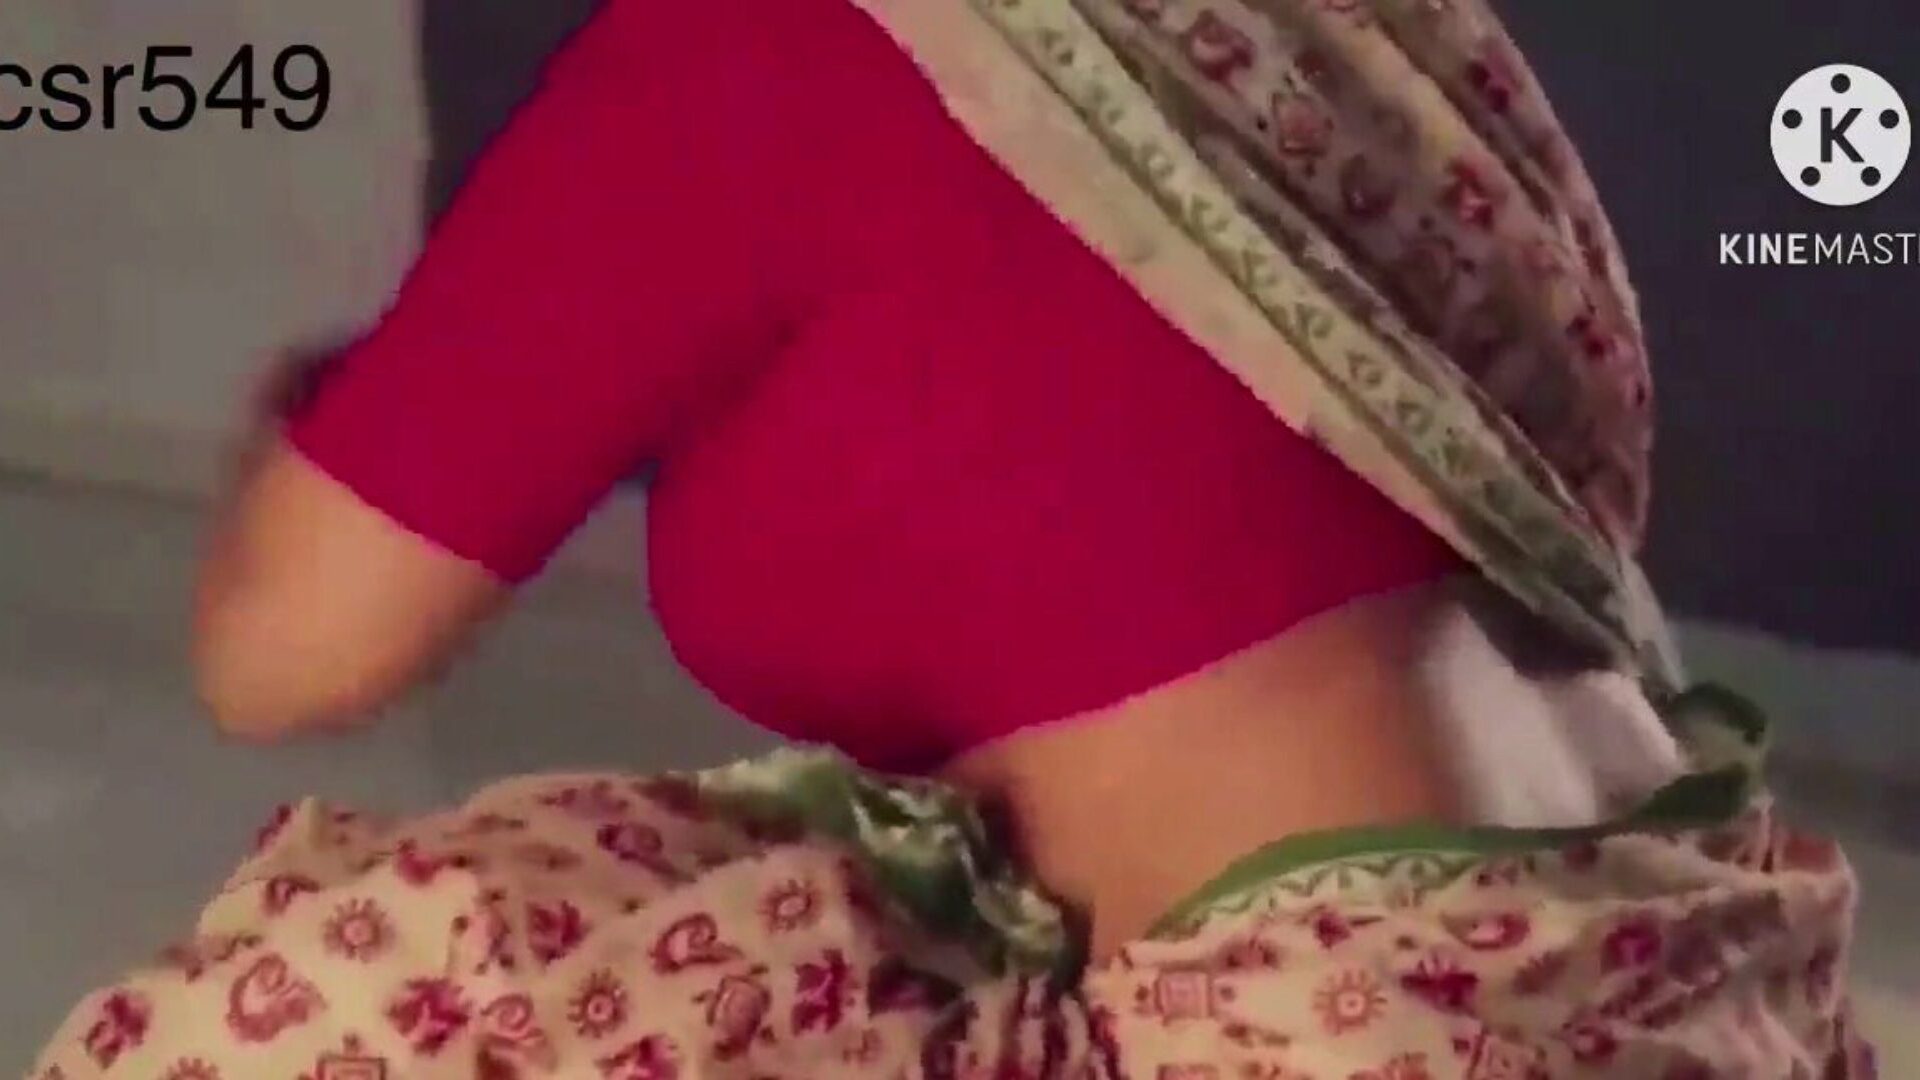 desi sexy n juicy red saree women geted by ... παρακολουθήστε desi sexy and juicy woman in a red saree get fucked by slave movie on xhamster - η απόλυτη βάση δεδομένων των δωρεάν ασιατικών ινδικών hd porno tube vids